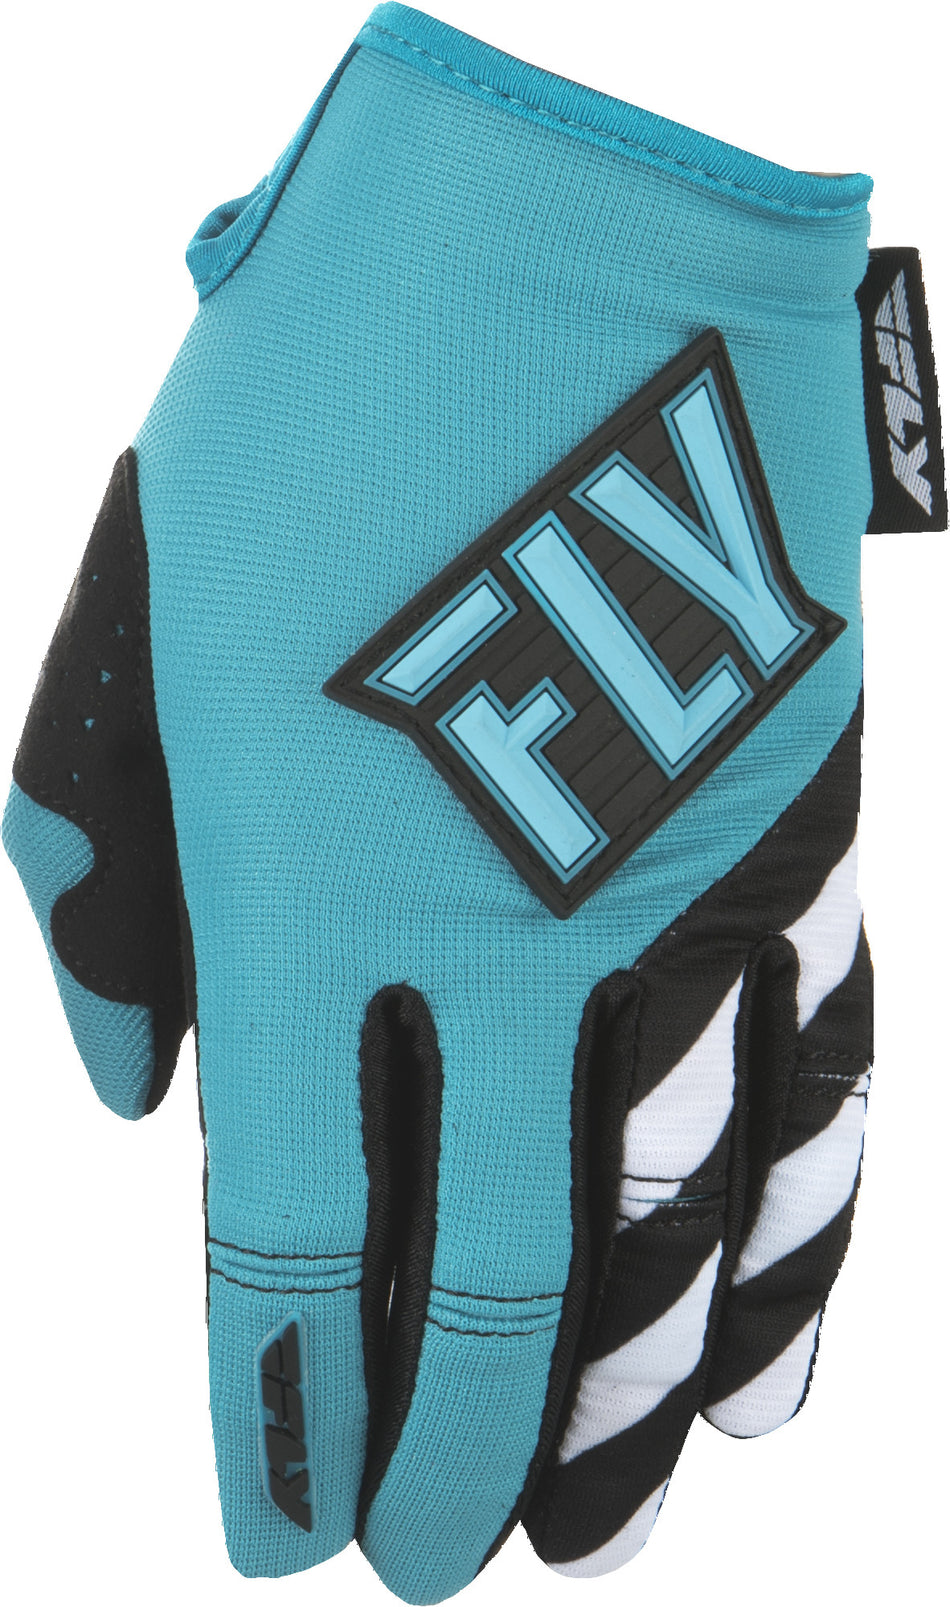 FLY RACING Kinetic Women's Gloves Blue/Teal Ym 371-61103